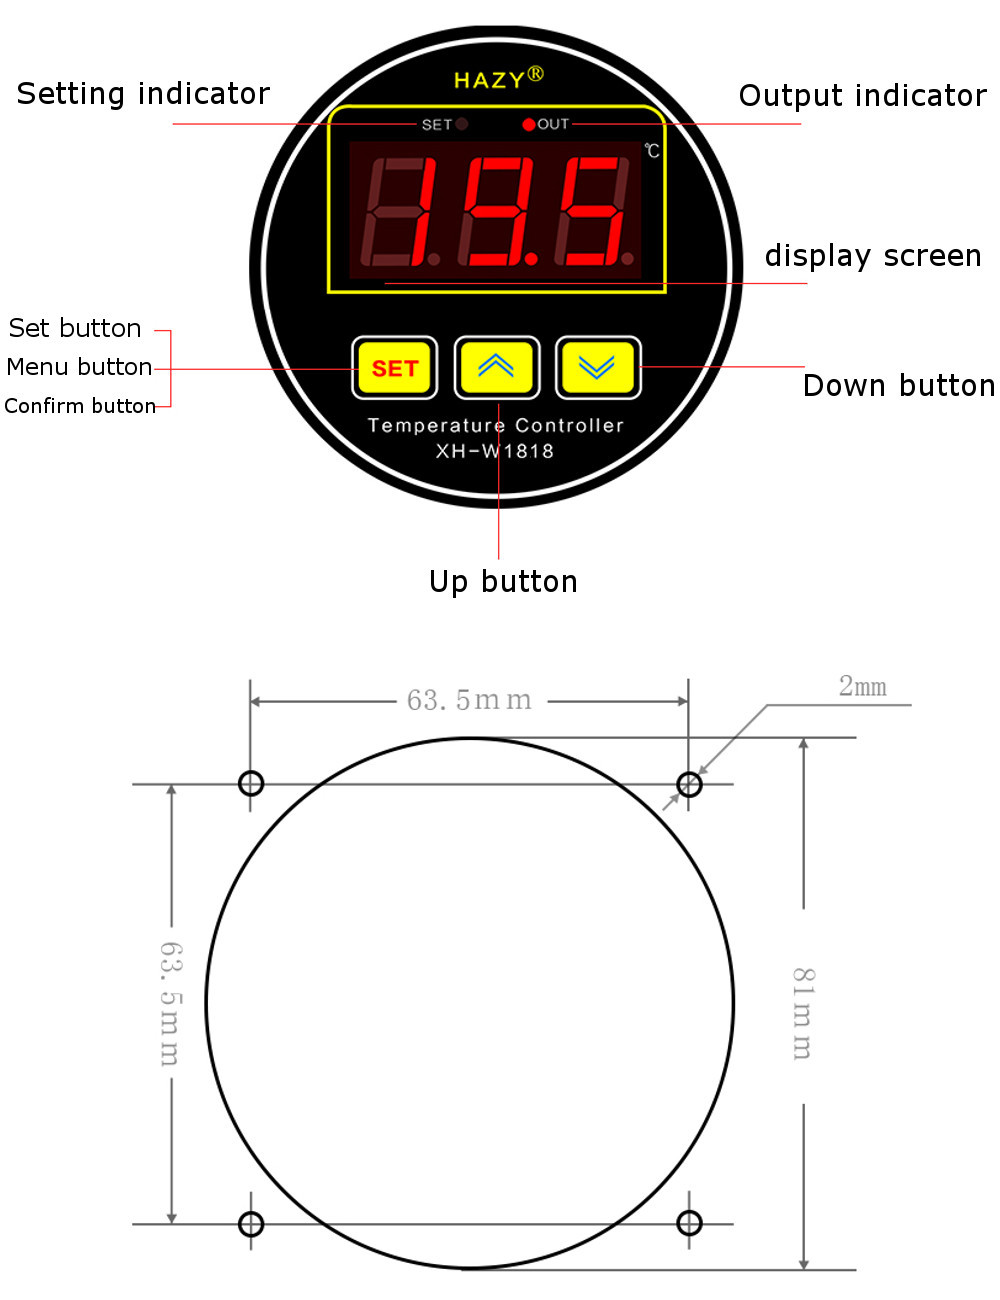 XH-W1818-High-Precision-Microcomputer-Temperature-Controller-Circular-Digital-Display-Embedded-Therm-1590312-3